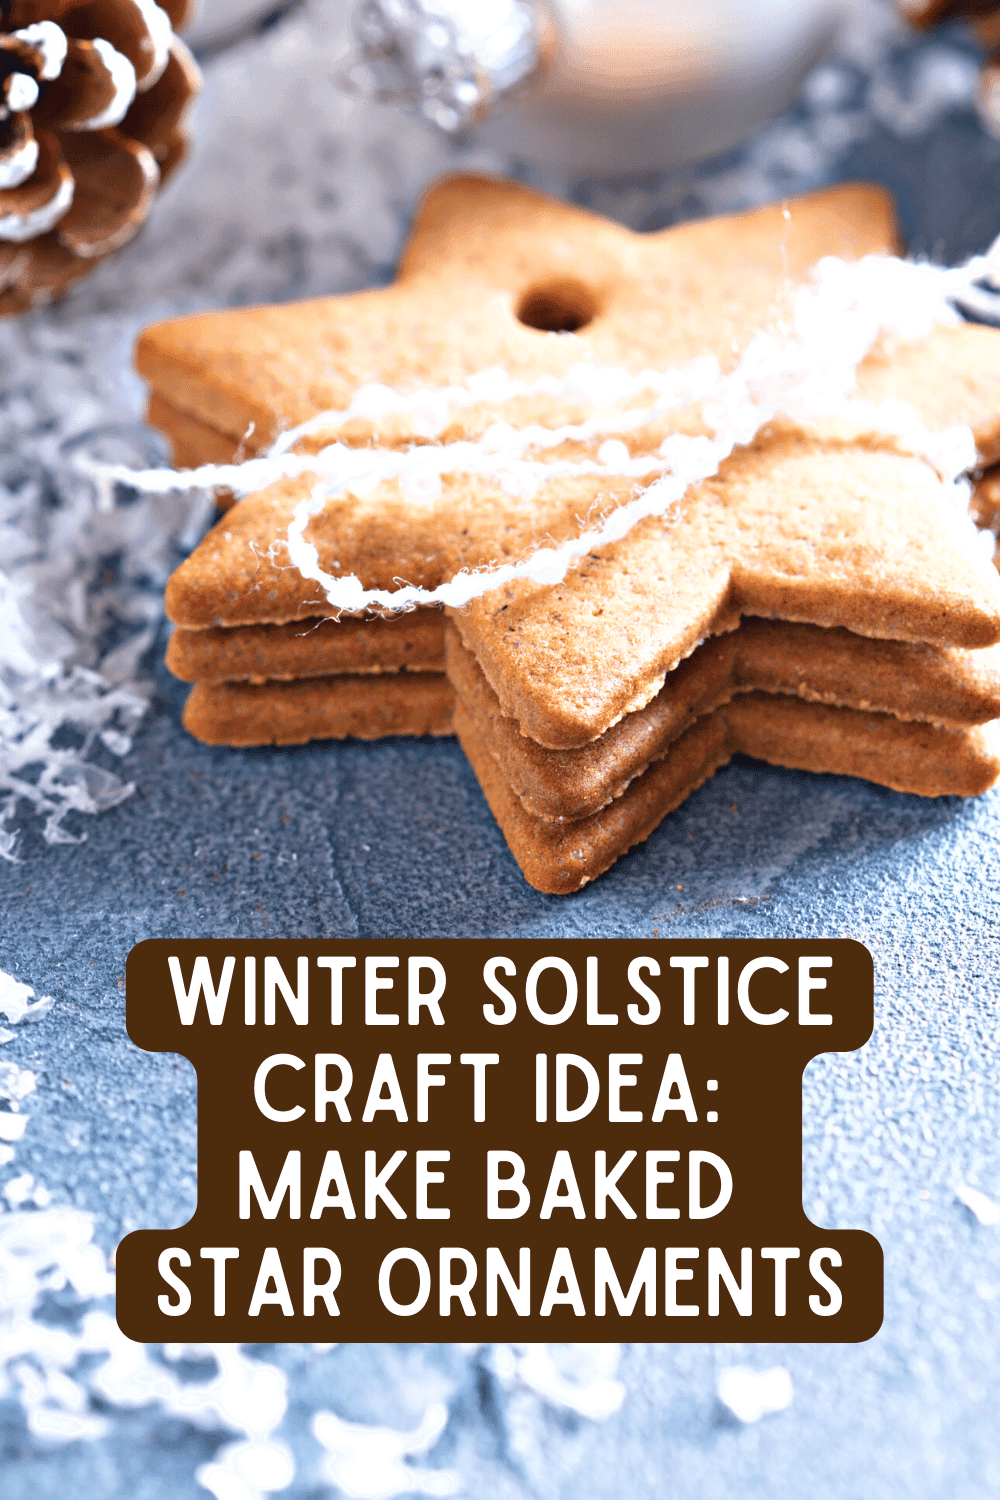 Winter Solstice Craft Projects Ideas - Baked Star Ornaments 